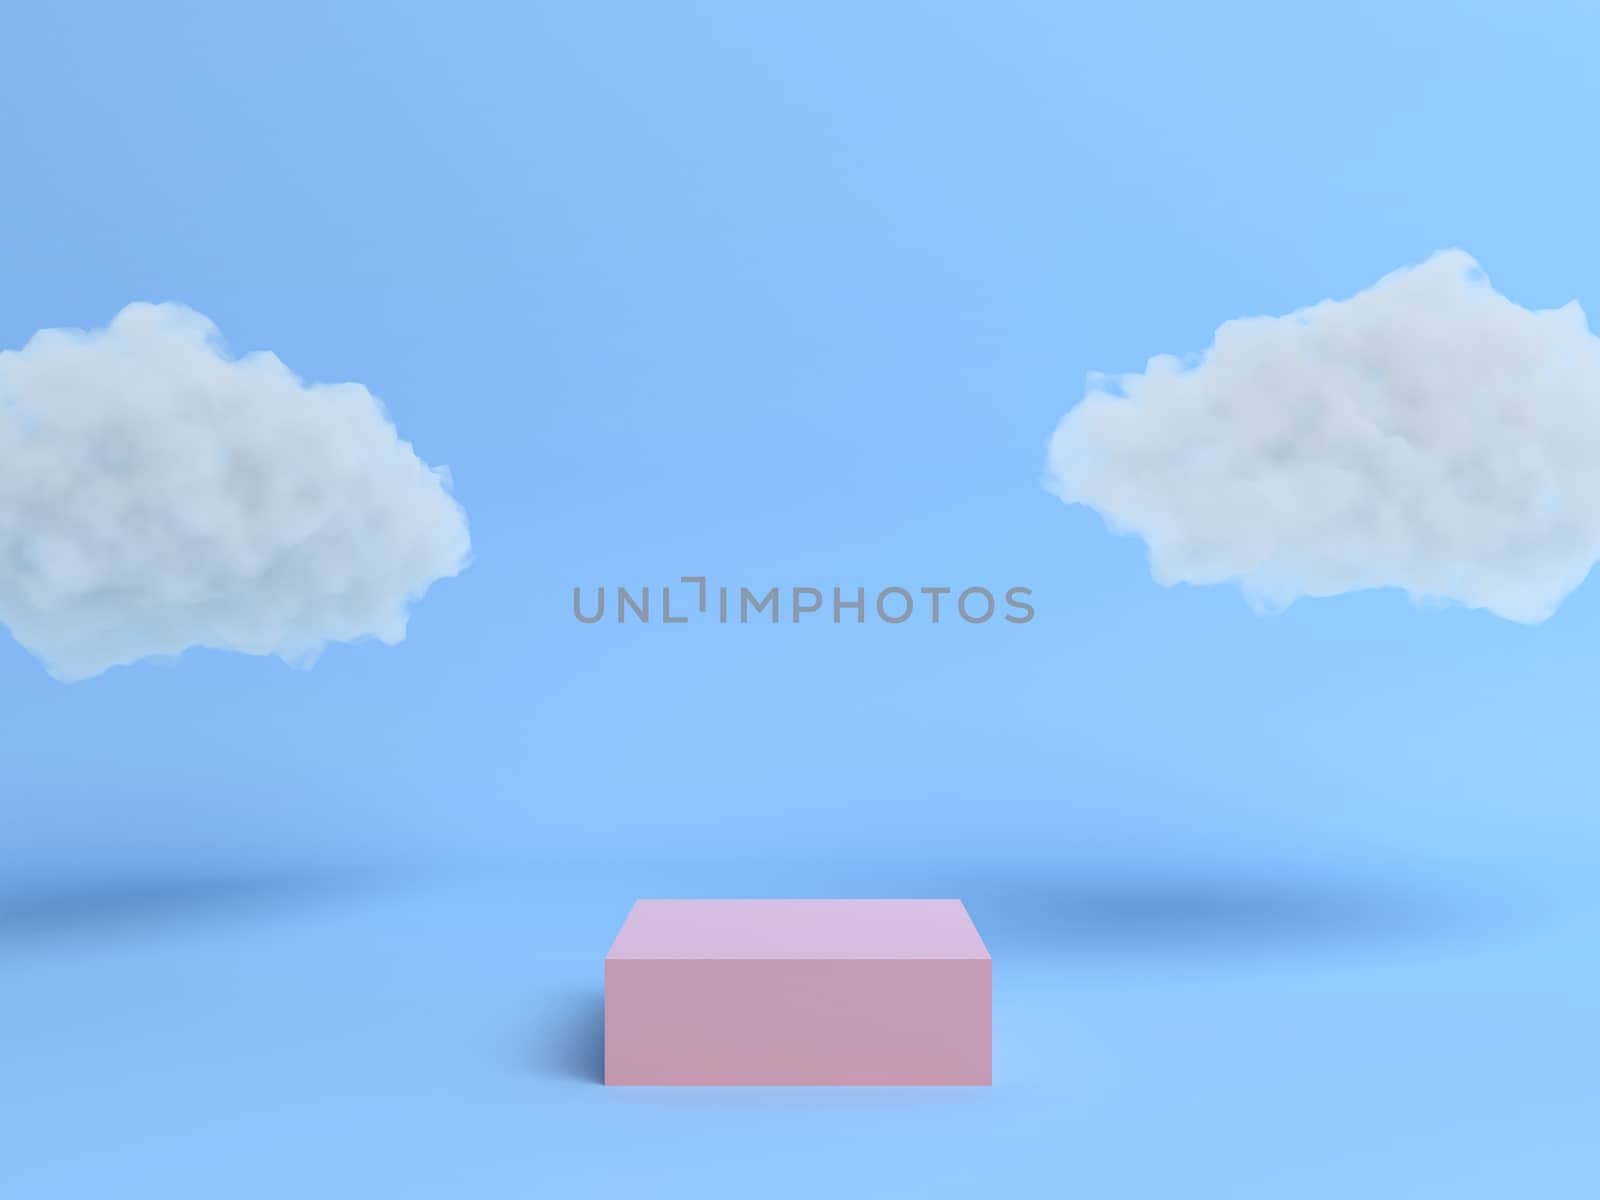 Pastel podium with cloud on pastel colors background. 3d rendering.